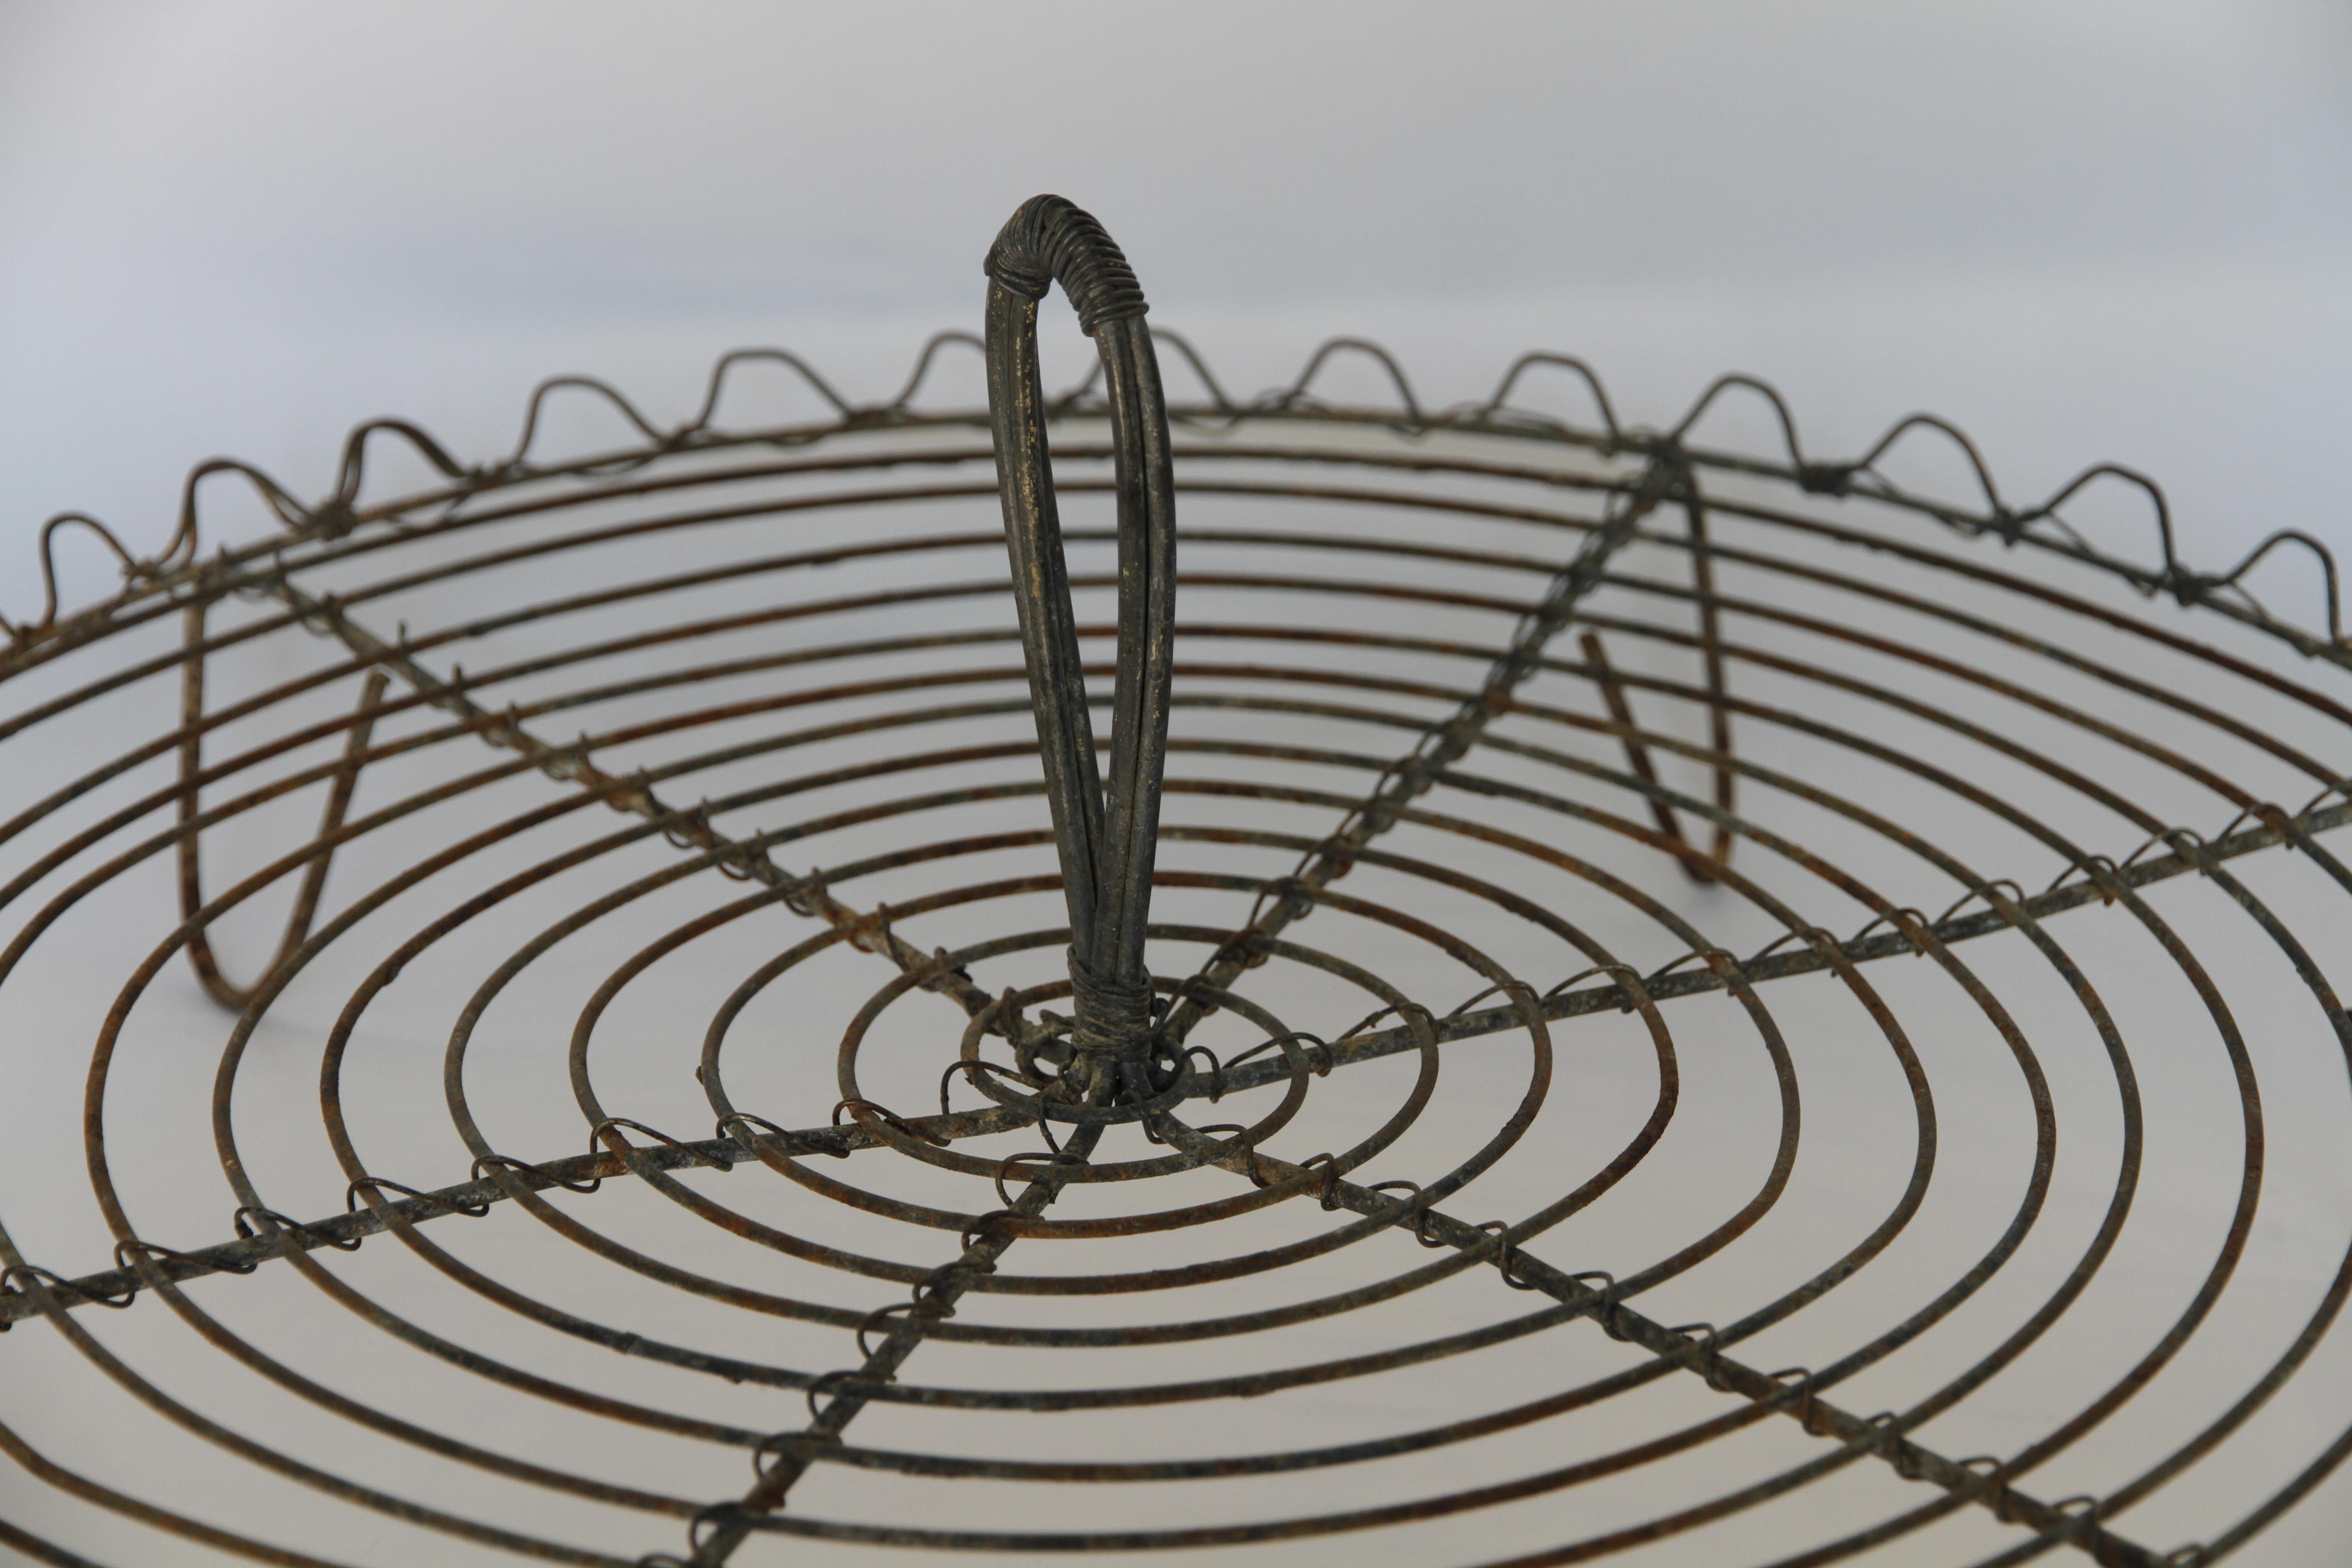 A large antique French wire cooling rack used for cooling pastries and bread straight from the oven. The handle was used to move the rack from kitchen to bakery for display. The tray has beautiful looped wire edging and stands on six wire legs. A